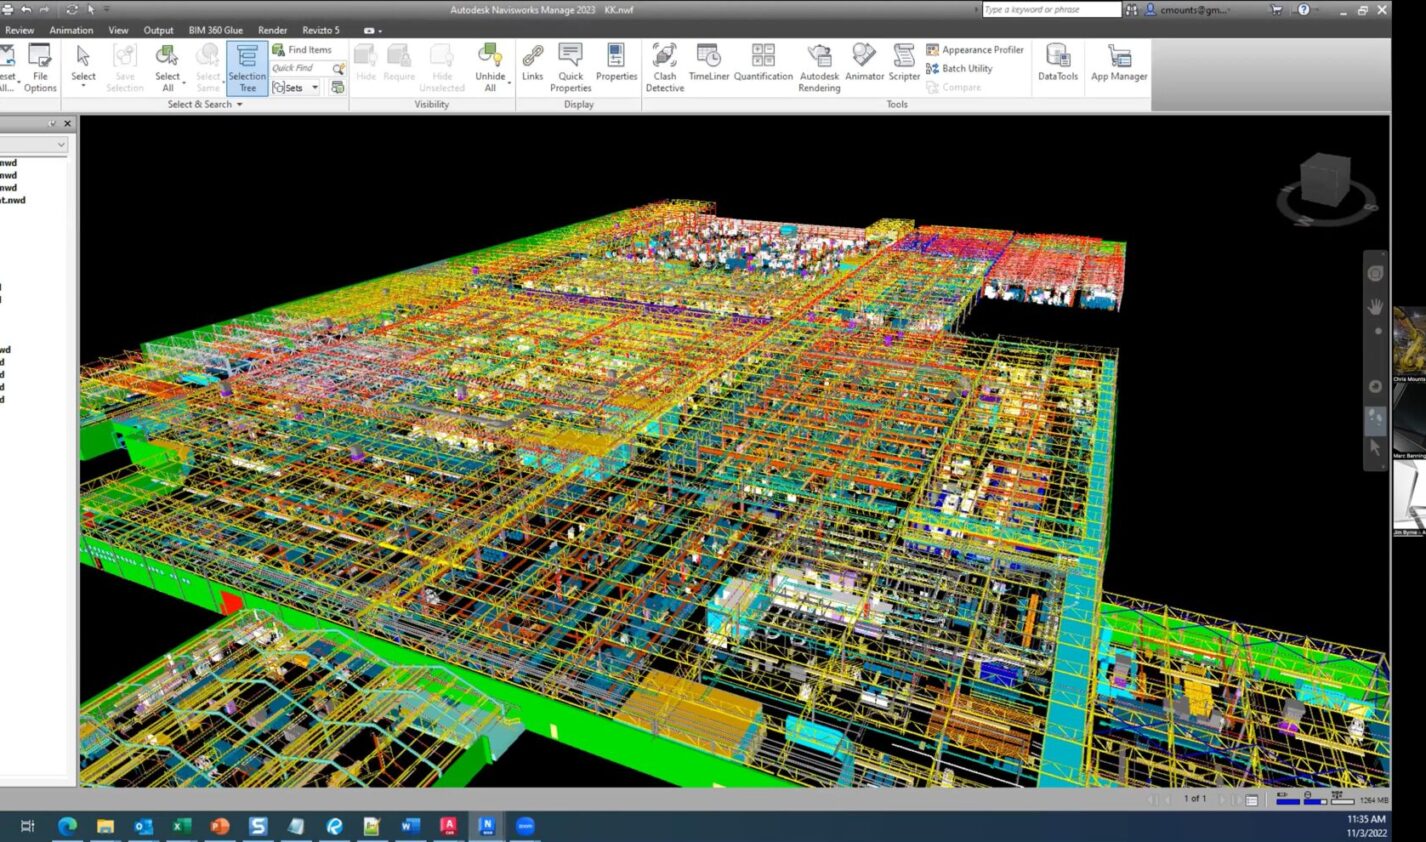 Screenshot of a Zoom webinar with three presenters sharing a large-scale factory model in Navisworks software